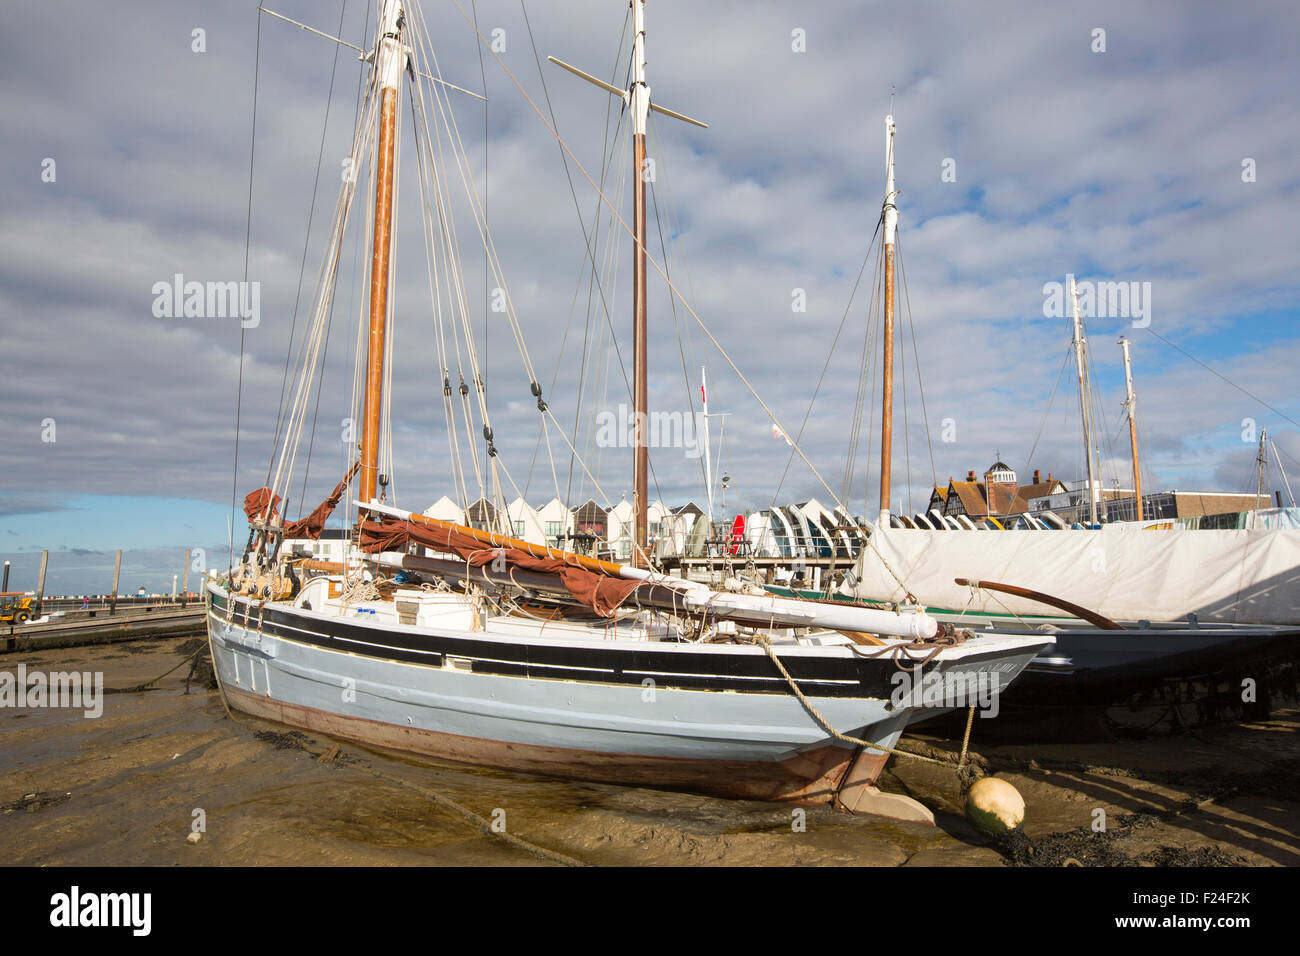 Traditional wooden Smack fishing boats in Brightlingsea, Essex, UK. Stock Photo